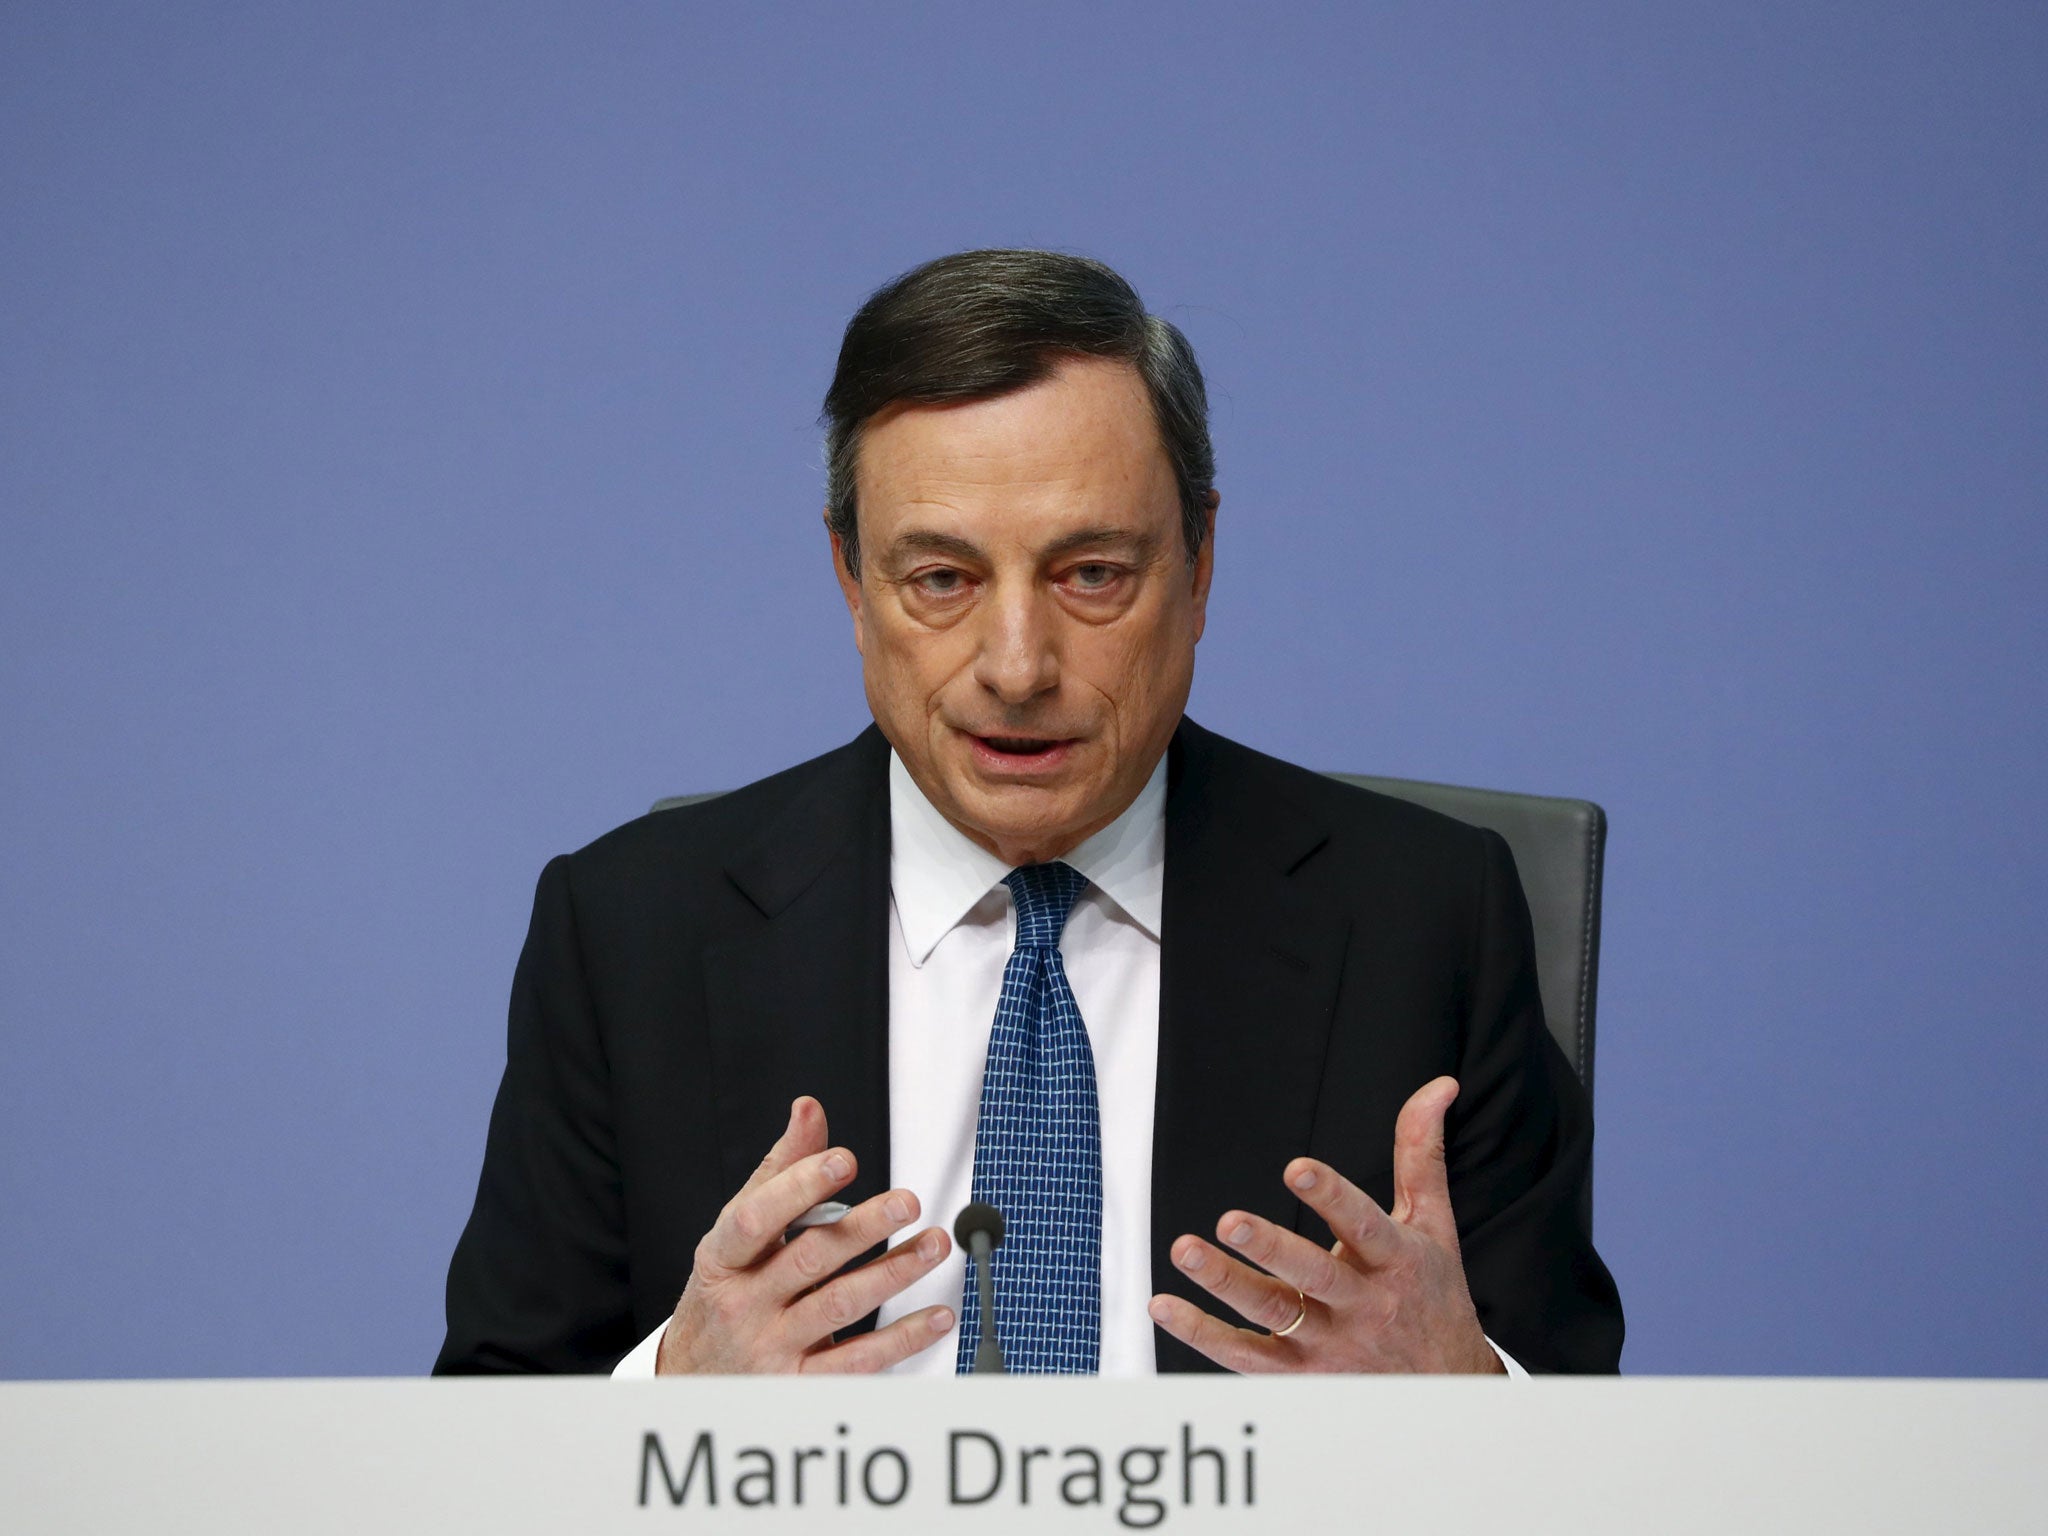 The European Central Bank's president Mario Draghi announced a major programme to buy up eurozone government bonds and company debt in January 2015